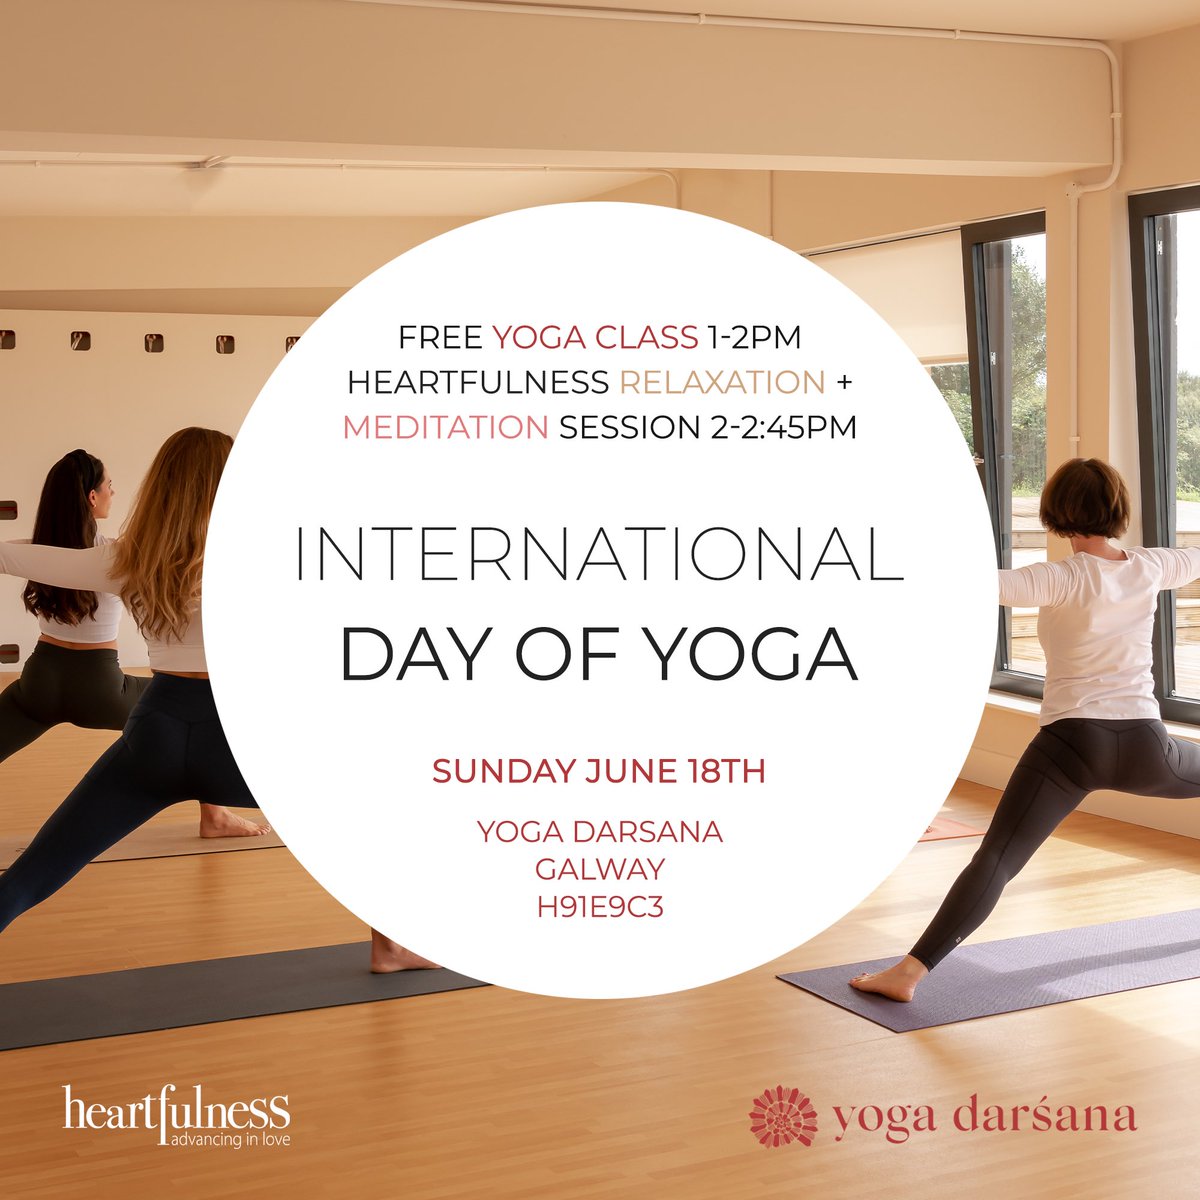 For International Yoga Day we're planning a free yoga and meditation class on the 18th of June at Yoga Darsana. Over 18, all welcome, remember to bring your own mat! 🧘‍♂️

#heartfulness #yoga #meditation #relaxation #InternationalYogaDay #yogaday #freeyoga #yogaireland